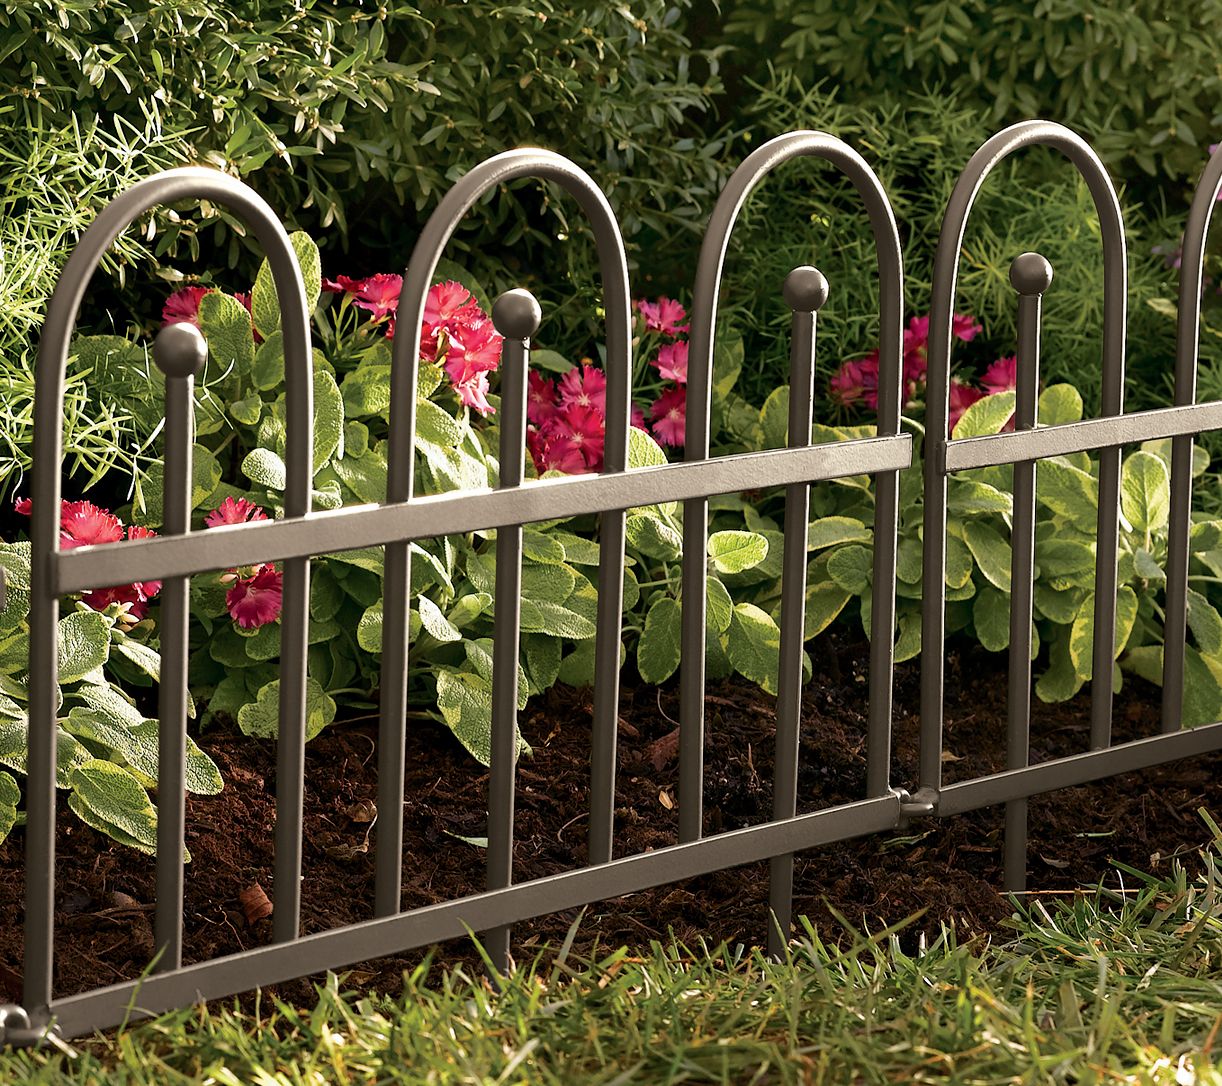 Iron Fence Edging by Plow & Hearth - QVC.com